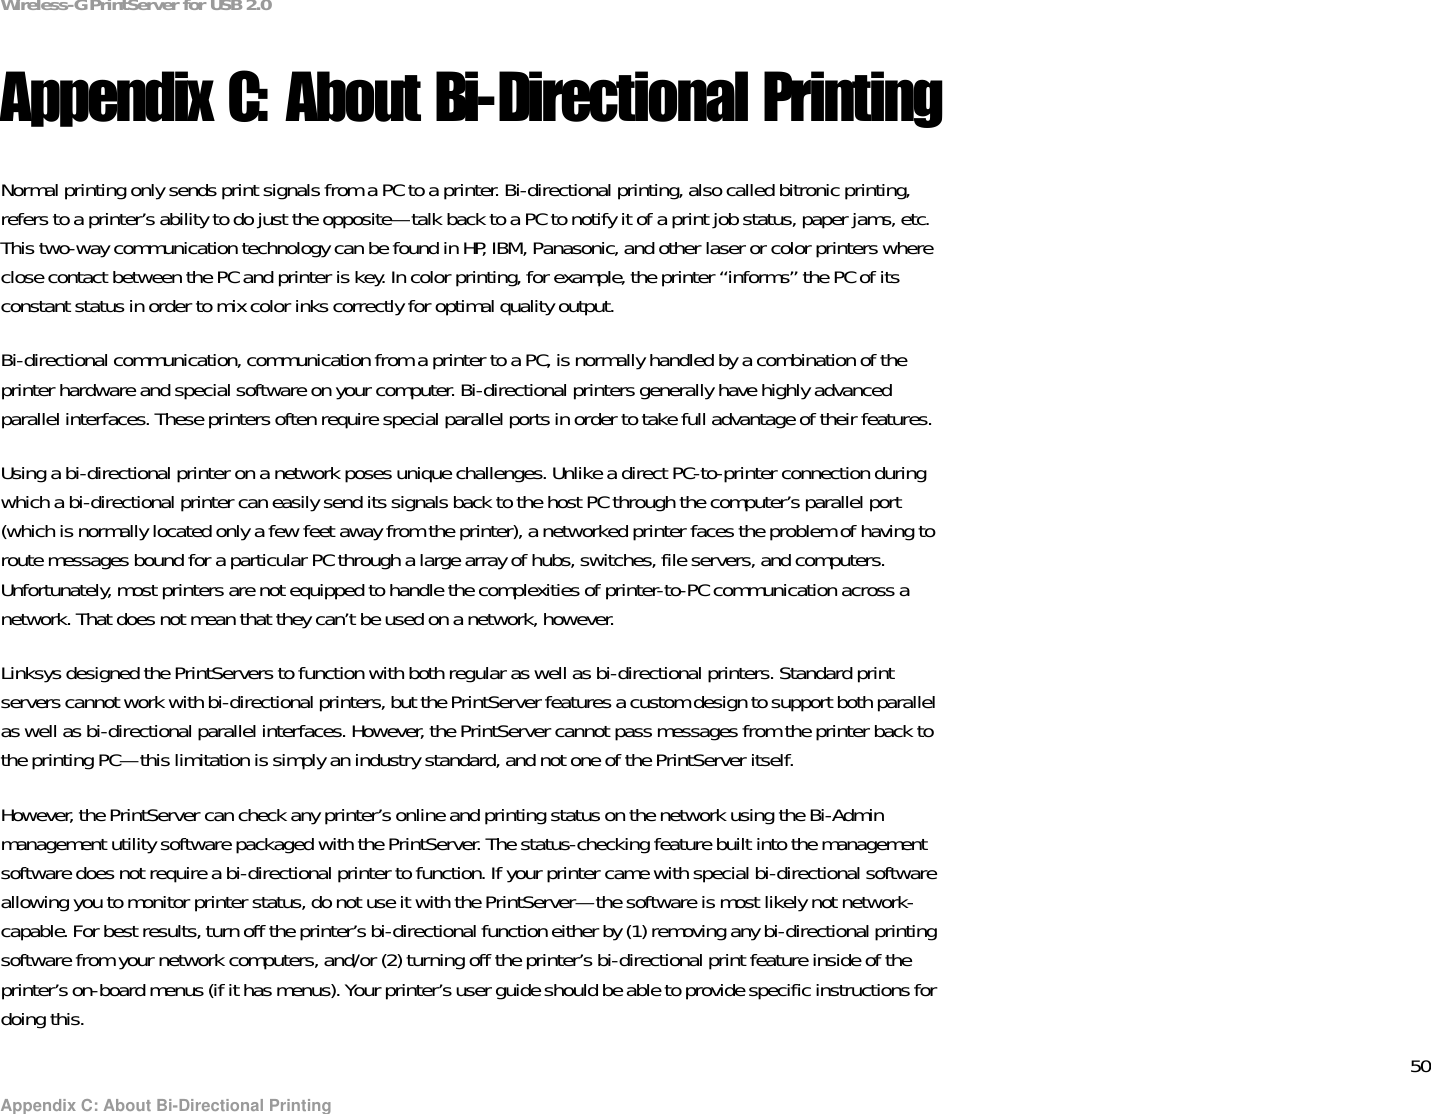 50Appendix C: About Bi-Directional PrintingWireless-G PrintServer for USB 2.0Appendix C: About Bi-Directional PrintingNormal printing only sends print signals from a PC to a printer. Bi-directional printing, also called bitronic printing, refers to a printer’s ability to do just the opposite—talk back to a PC to notify it of a print job status, paper jams, etc. This two-way communication technology can be found in HP, IBM, Panasonic, and other laser or color printers where close contact between the PC and printer is key. In color printing, for example, the printer “informs” the PC of its constant status in order to mix color inks correctly for optimal quality output. Bi-directional communication, communication from a printer to a PC, is normally handled by a combination of the printer hardware and special software on your computer. Bi-directional printers generally have highly advanced parallel interfaces. These printers often require special parallel ports in order to take full advantage of their features. Using a bi-directional printer on a network poses unique challenges. Unlike a direct PC-to-printer connection during which a bi-directional printer can easily send its signals back to the host PC through the computer’s parallel port (which is normally located only a few feet away from the printer), a networked printer faces the problem of having to route messages bound for a particular PC through a large array of hubs, switches, file servers, and computers. Unfortunately, most printers are not equipped to handle the complexities of printer-to-PC communication across a network. That does not mean that they can’t be used on a network, however.Linksys designed the PrintServers to function with both regular as well as bi-directional printers. Standard print servers cannot work with bi-directional printers, but the PrintServer features a custom design to support both parallel as well as bi-directional parallel interfaces. However, the PrintServer cannot pass messages from the printer back to the printing PC—this limitation is simply an industry standard, and not one of the PrintServer itself. However, the PrintServer can check any printer’s online and printing status on the network using the Bi-Admin management utility software packaged with the PrintServer. The status-checking feature built into the management software does not require a bi-directional printer to function. If your printer came with special bi-directional software allowing you to monitor printer status, do not use it with the PrintServer—the software is most likely not network-capable. For best results, turn off the printer’s bi-directional function either by (1) removing any bi-directional printing software from your network computers, and/or (2) turning off the printer’s bi-directional print feature inside of the printer’s on-board menus (if it has menus). Your printer’s user guide should be able to provide specific instructions for doing this.